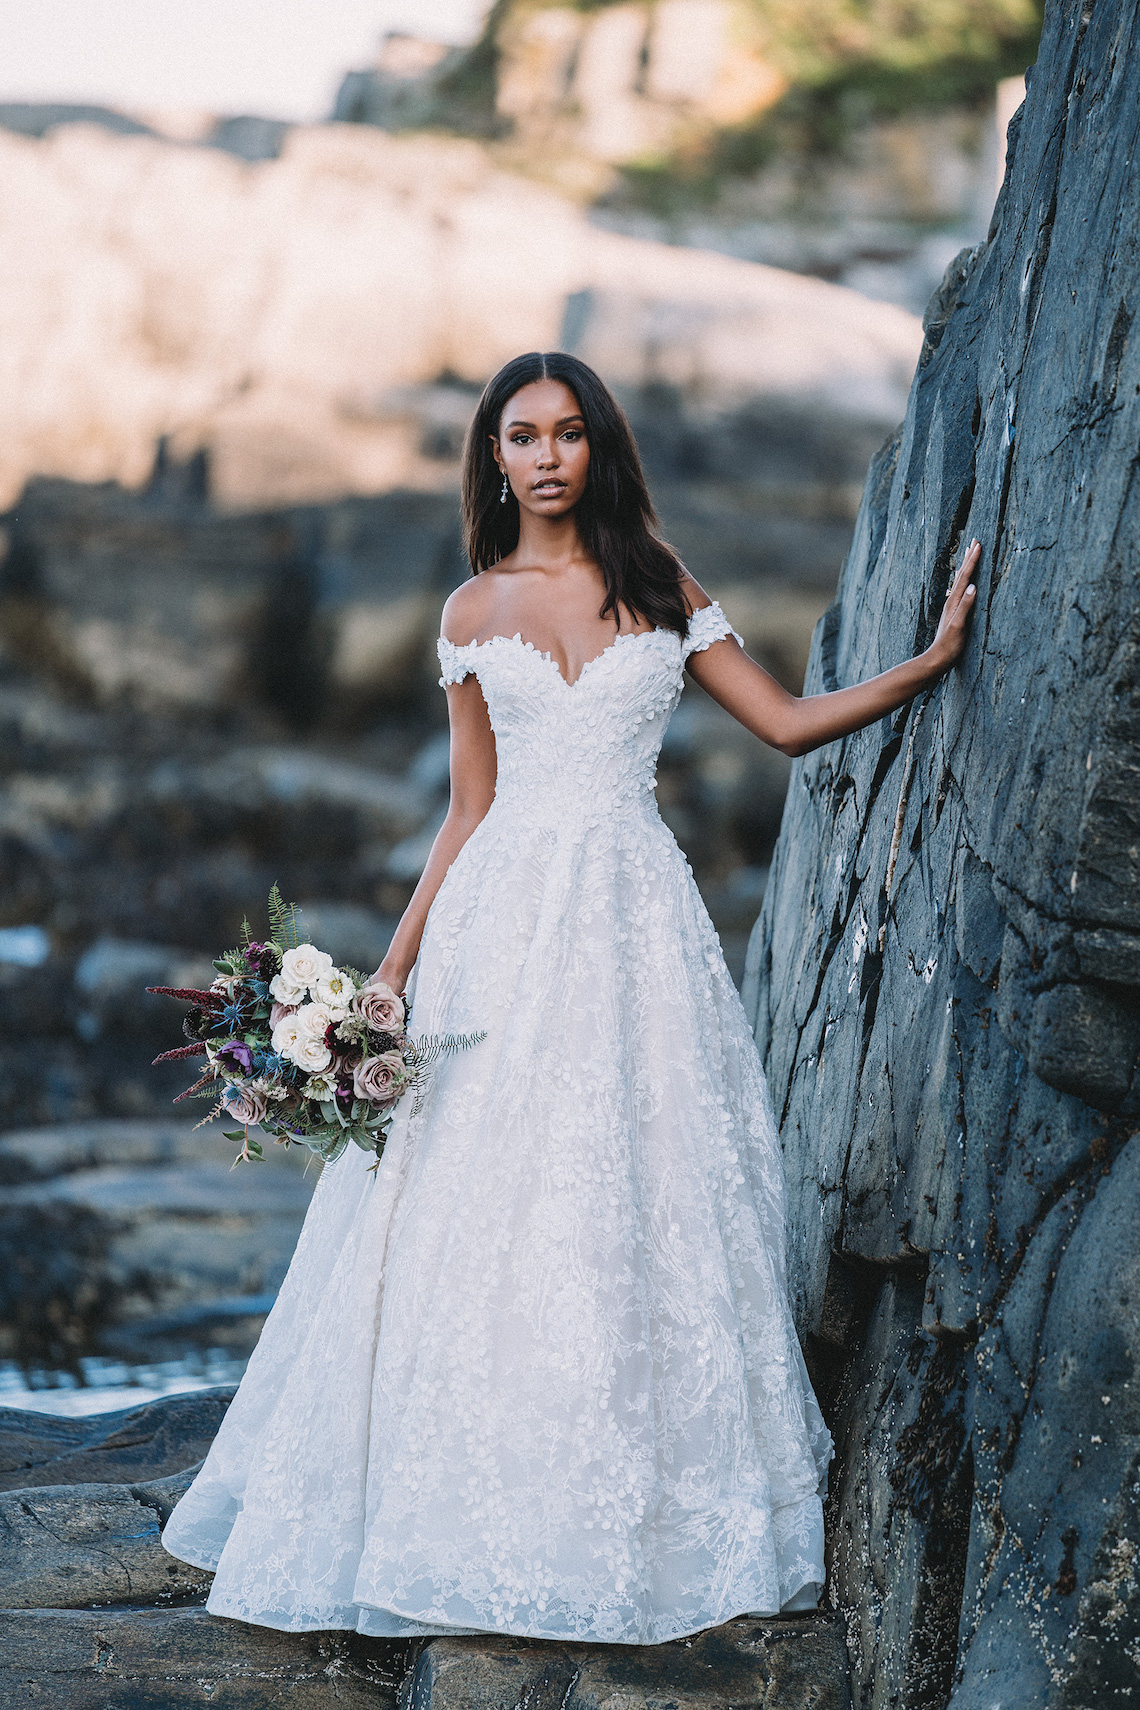 Top 10 Wedding Dress Shopping Tips From A Real Bridal Stylist – Allure Bridals 50